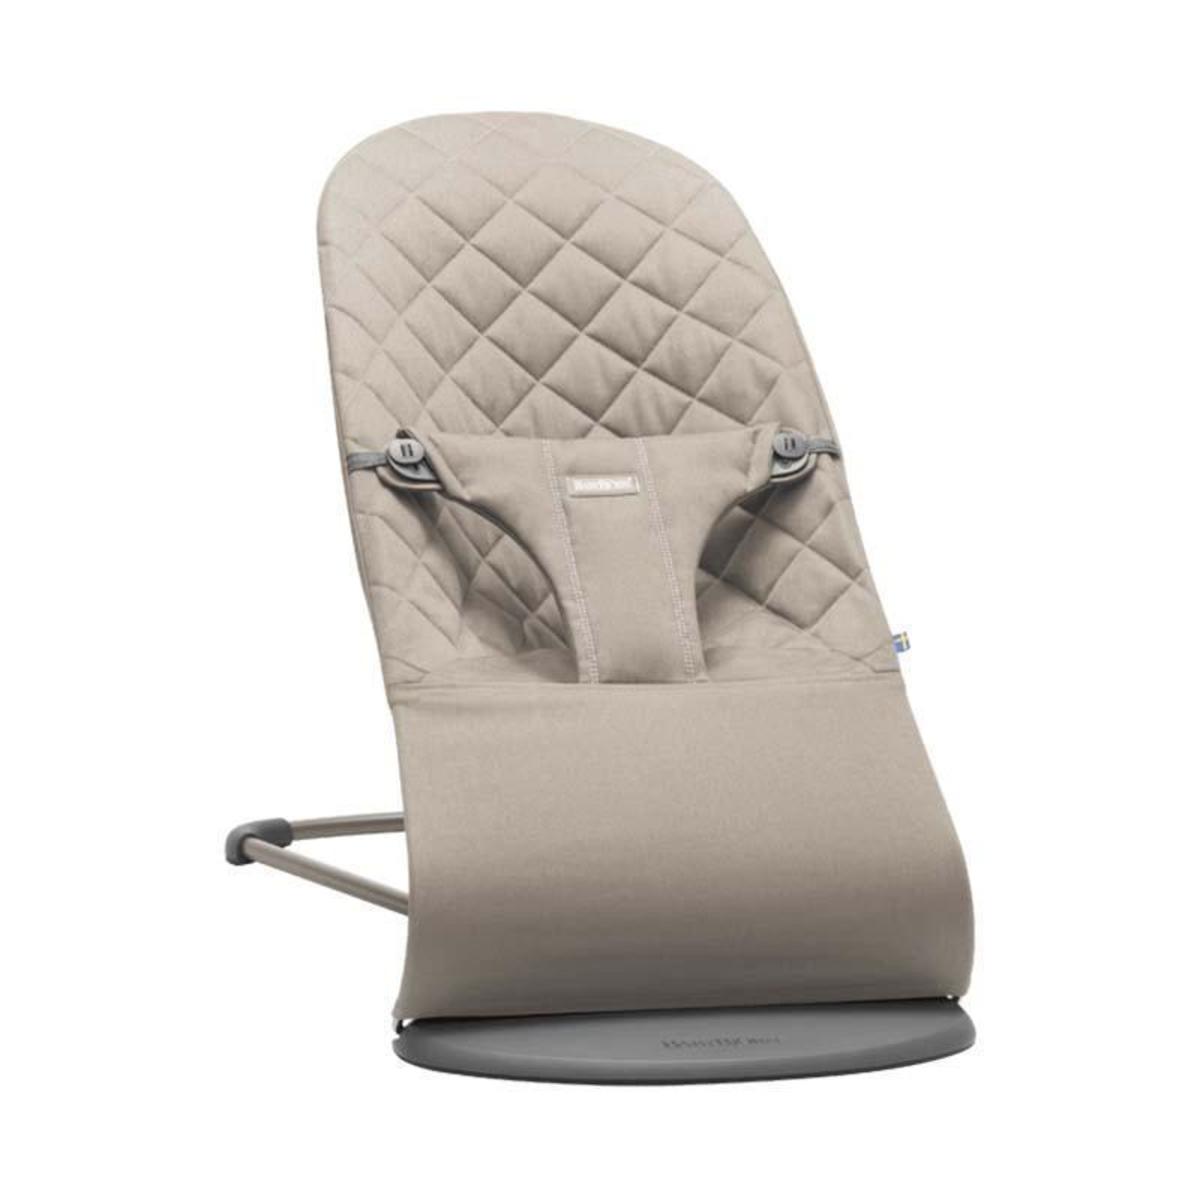 gray baby rocking chair